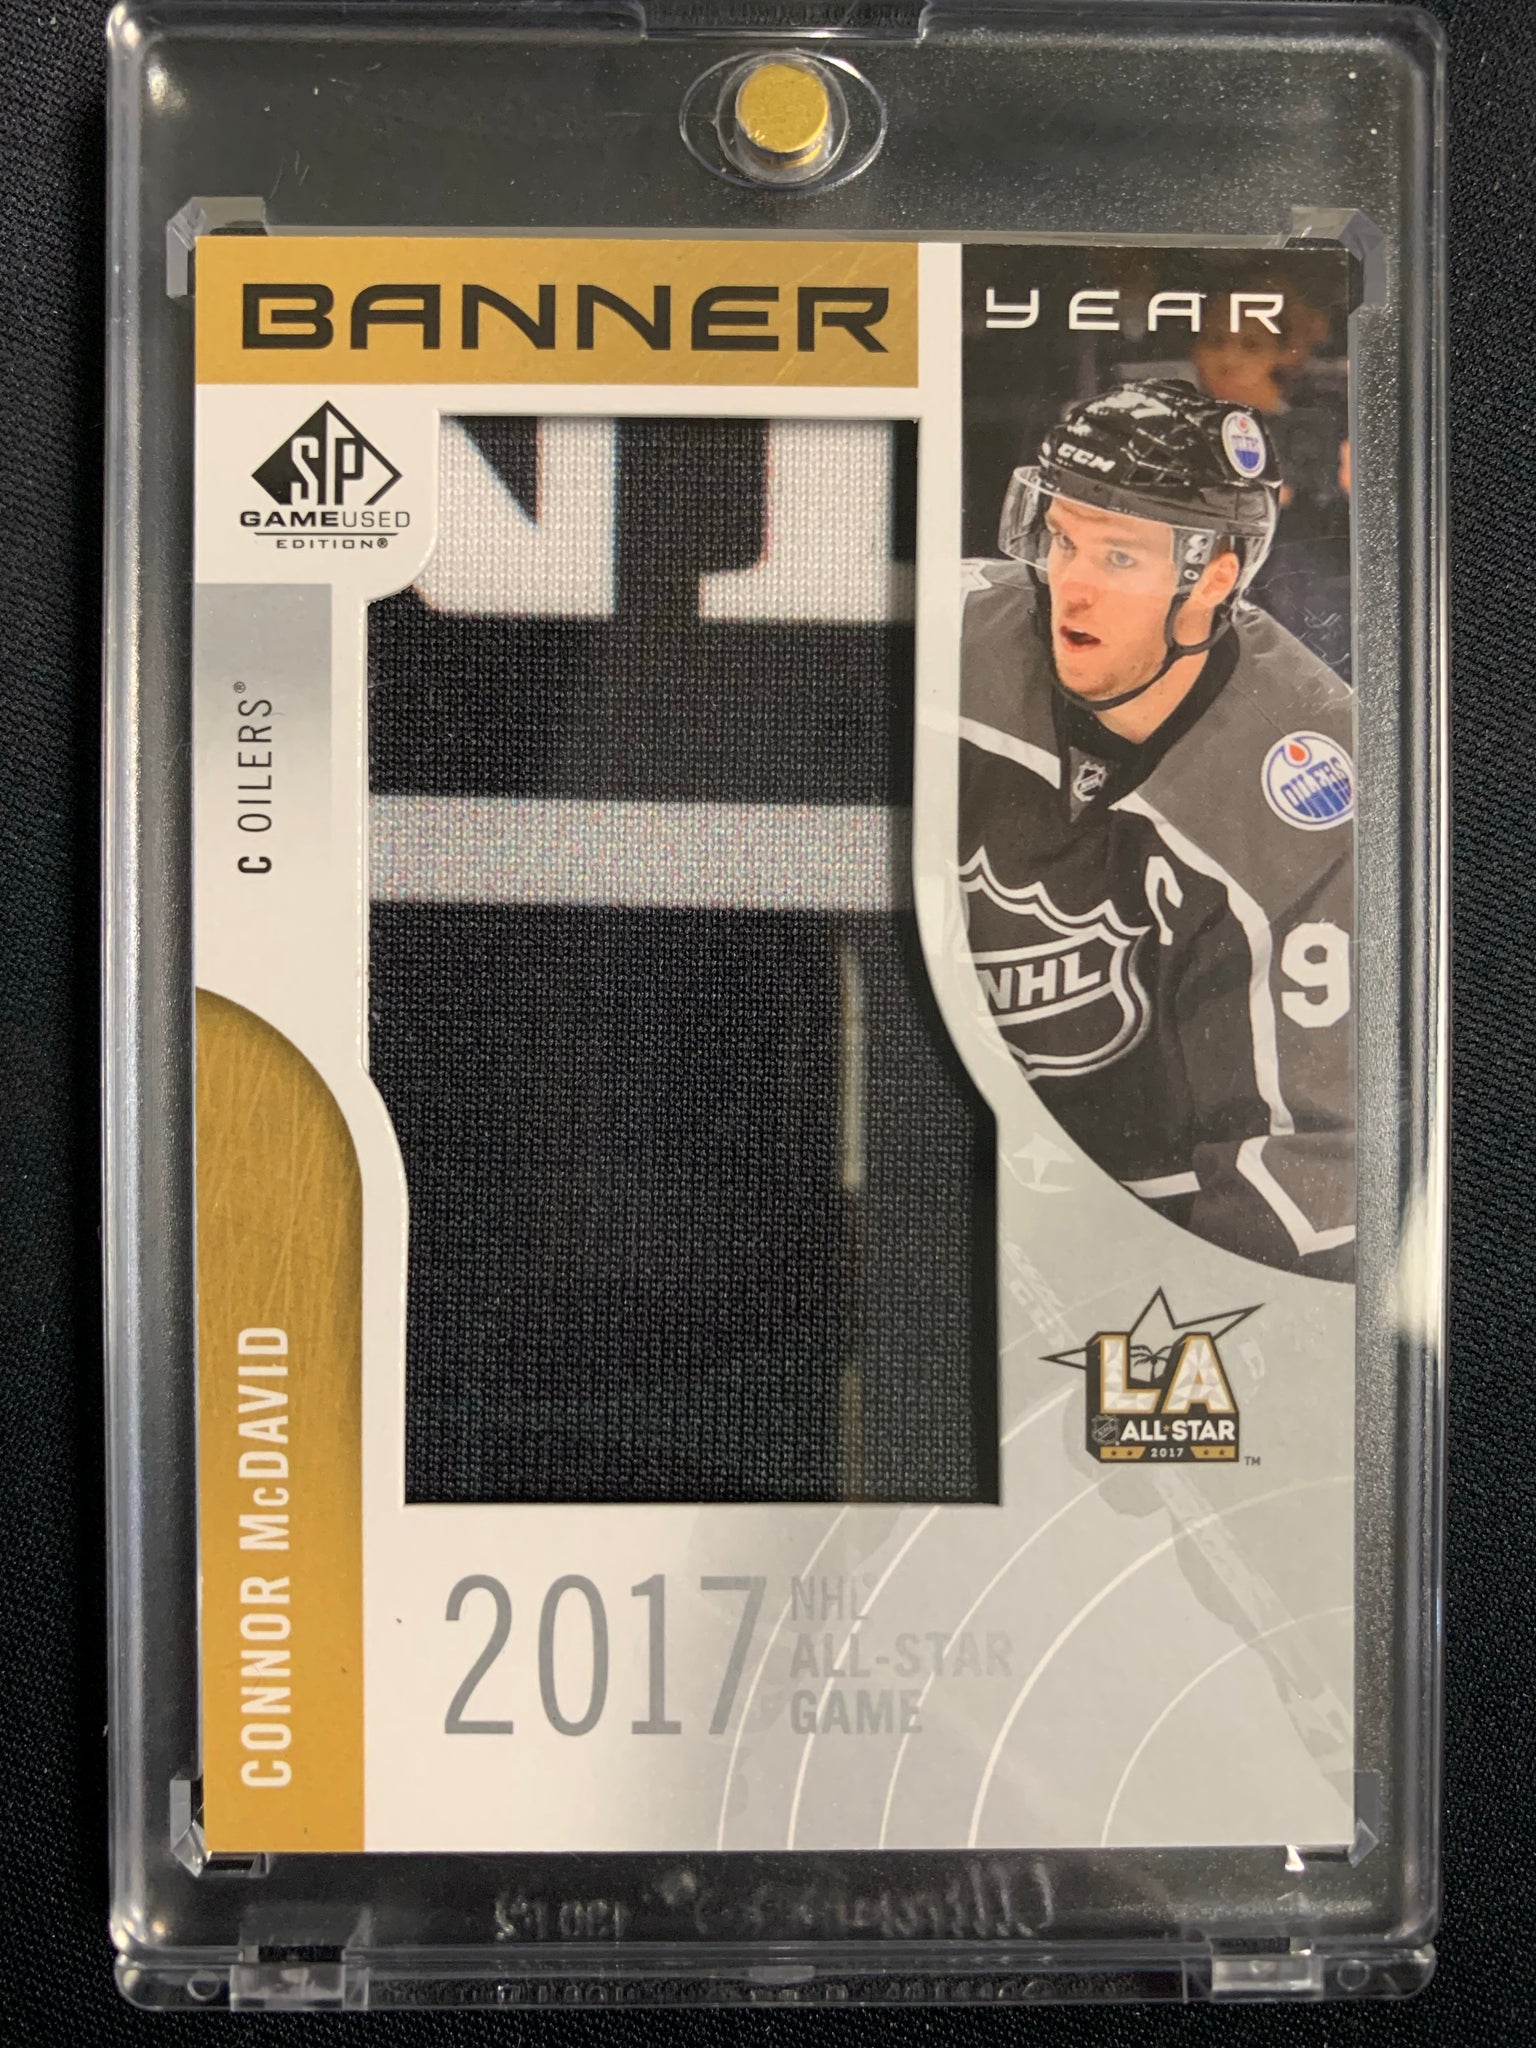 2017-18 UPPER DECK SP GAME USED HOCKEY #BAS-CM EDMONTON OILERS - CONNOR MCDAVID BANNER YEAR EVENT USED PATCH